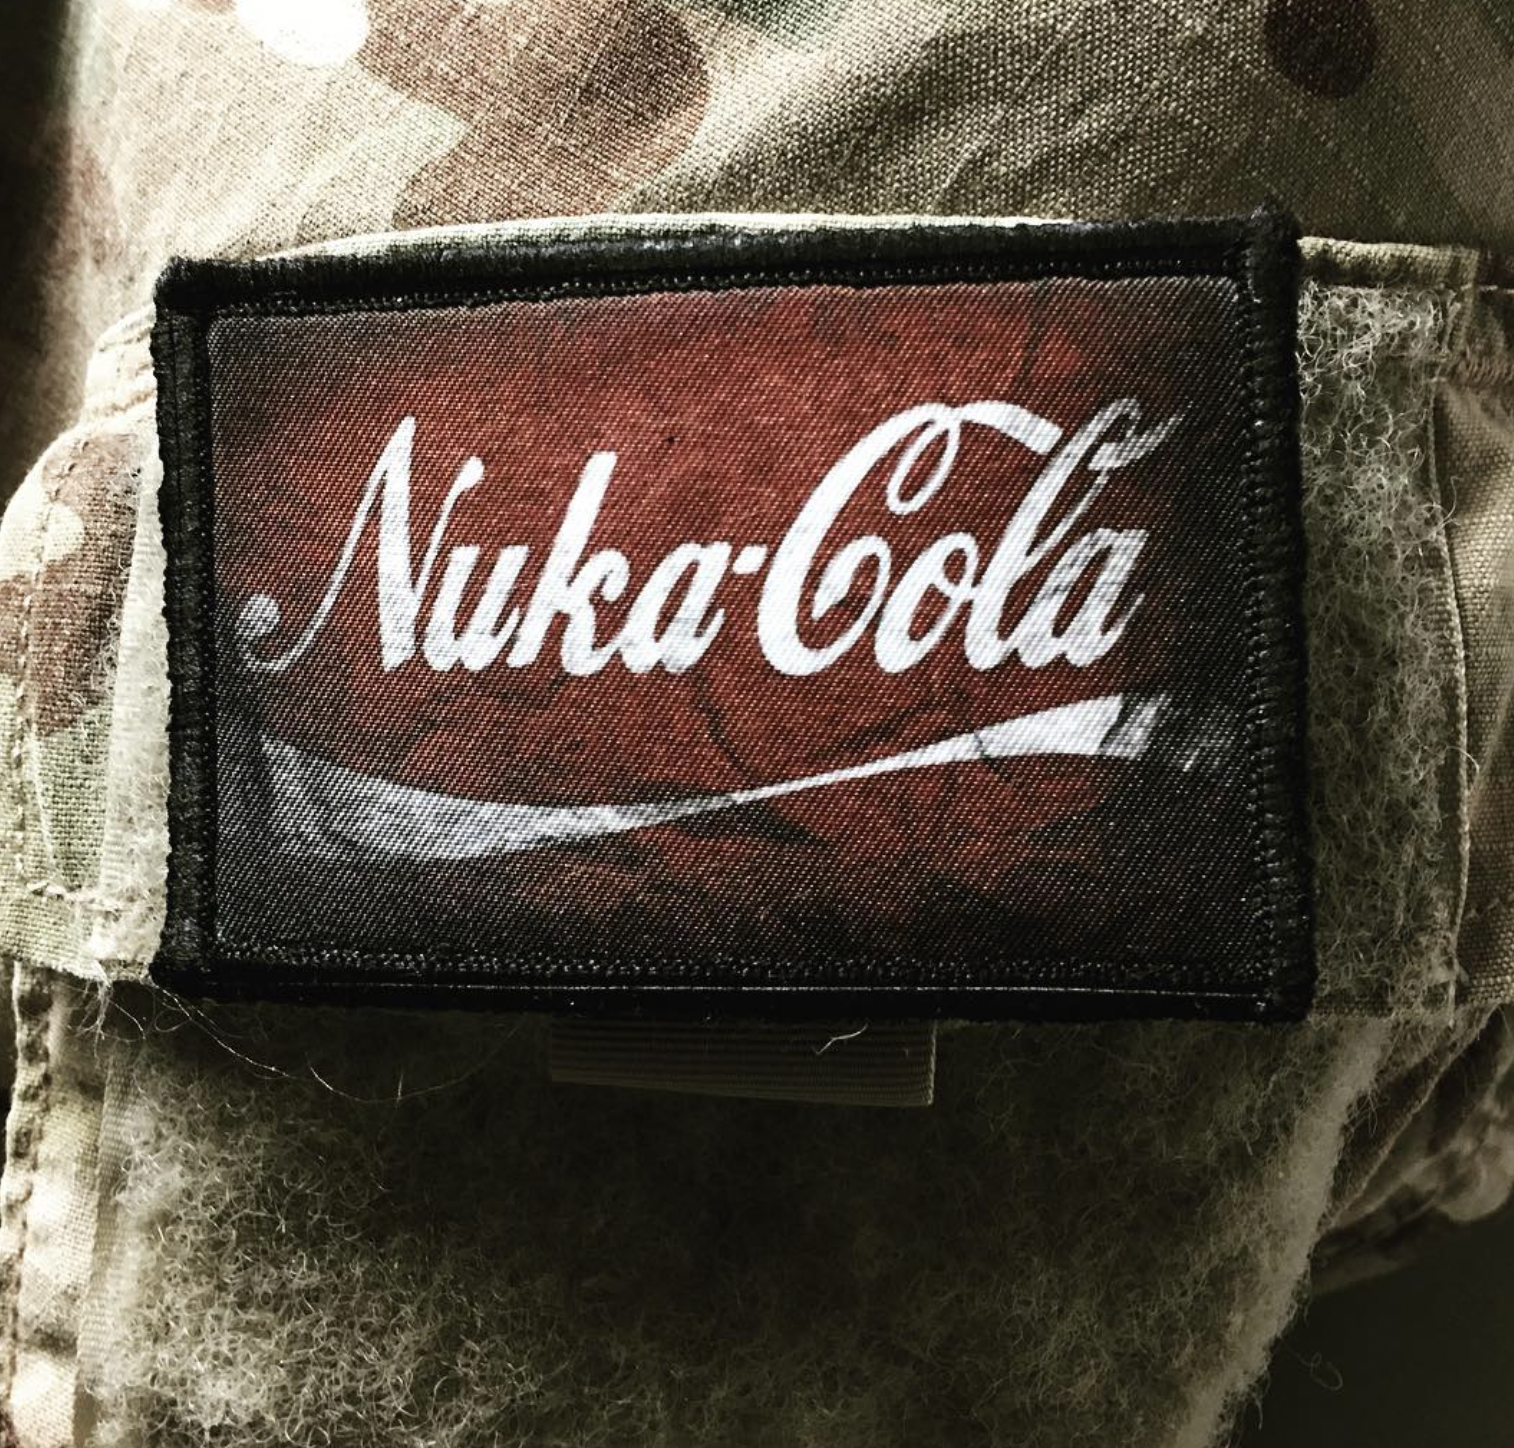 Nuka-Cola Logo on a Patch, which is on a sleeve of a jacket